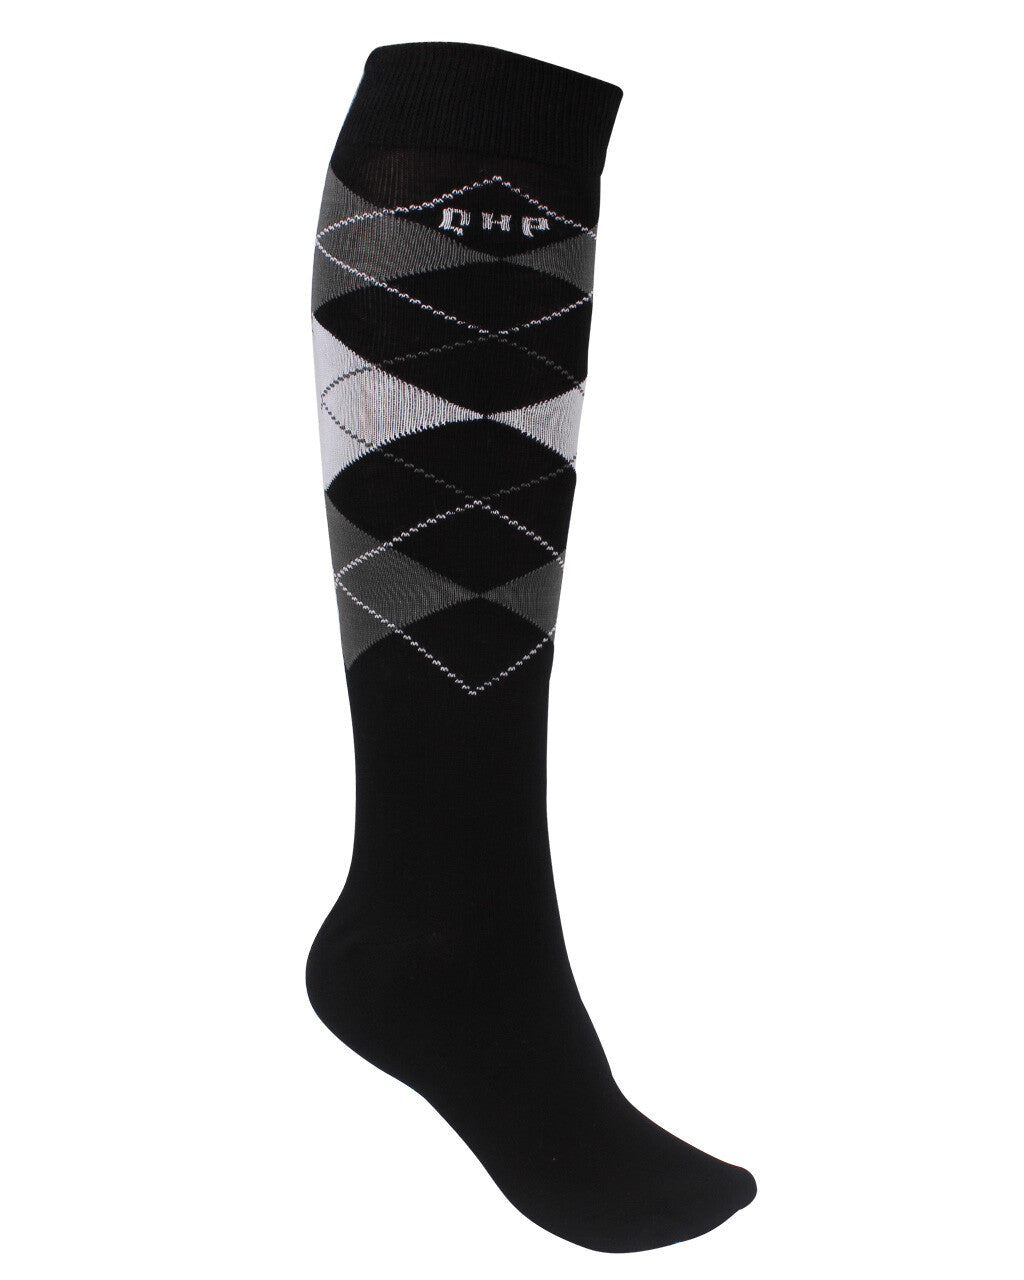 Brands of Q Knee Stockings Check